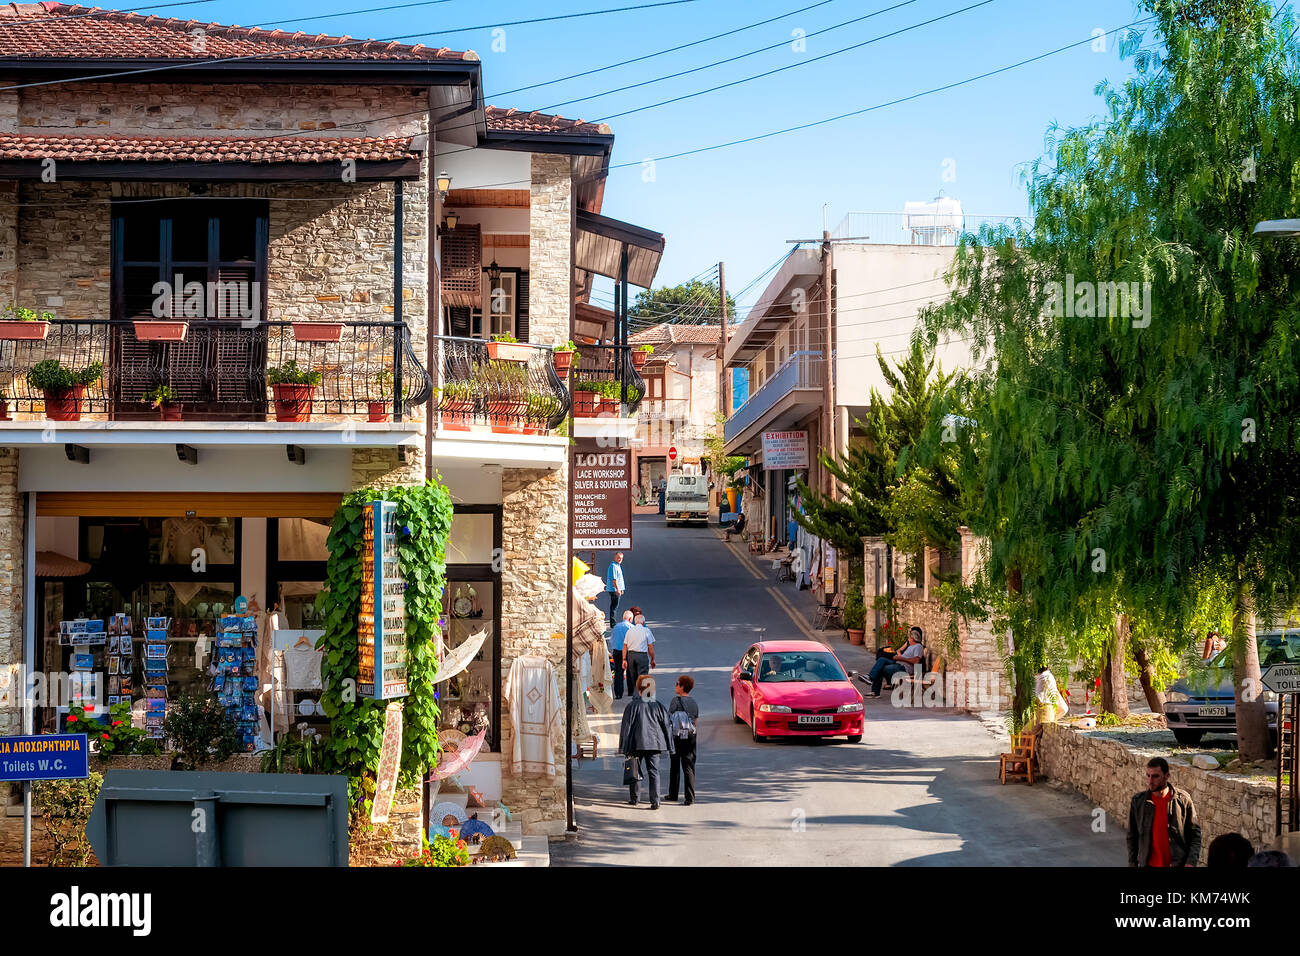 LEFKARA, CYPRUS - OCTOBER 15, 2011: View over the main street of the village Stock Photo